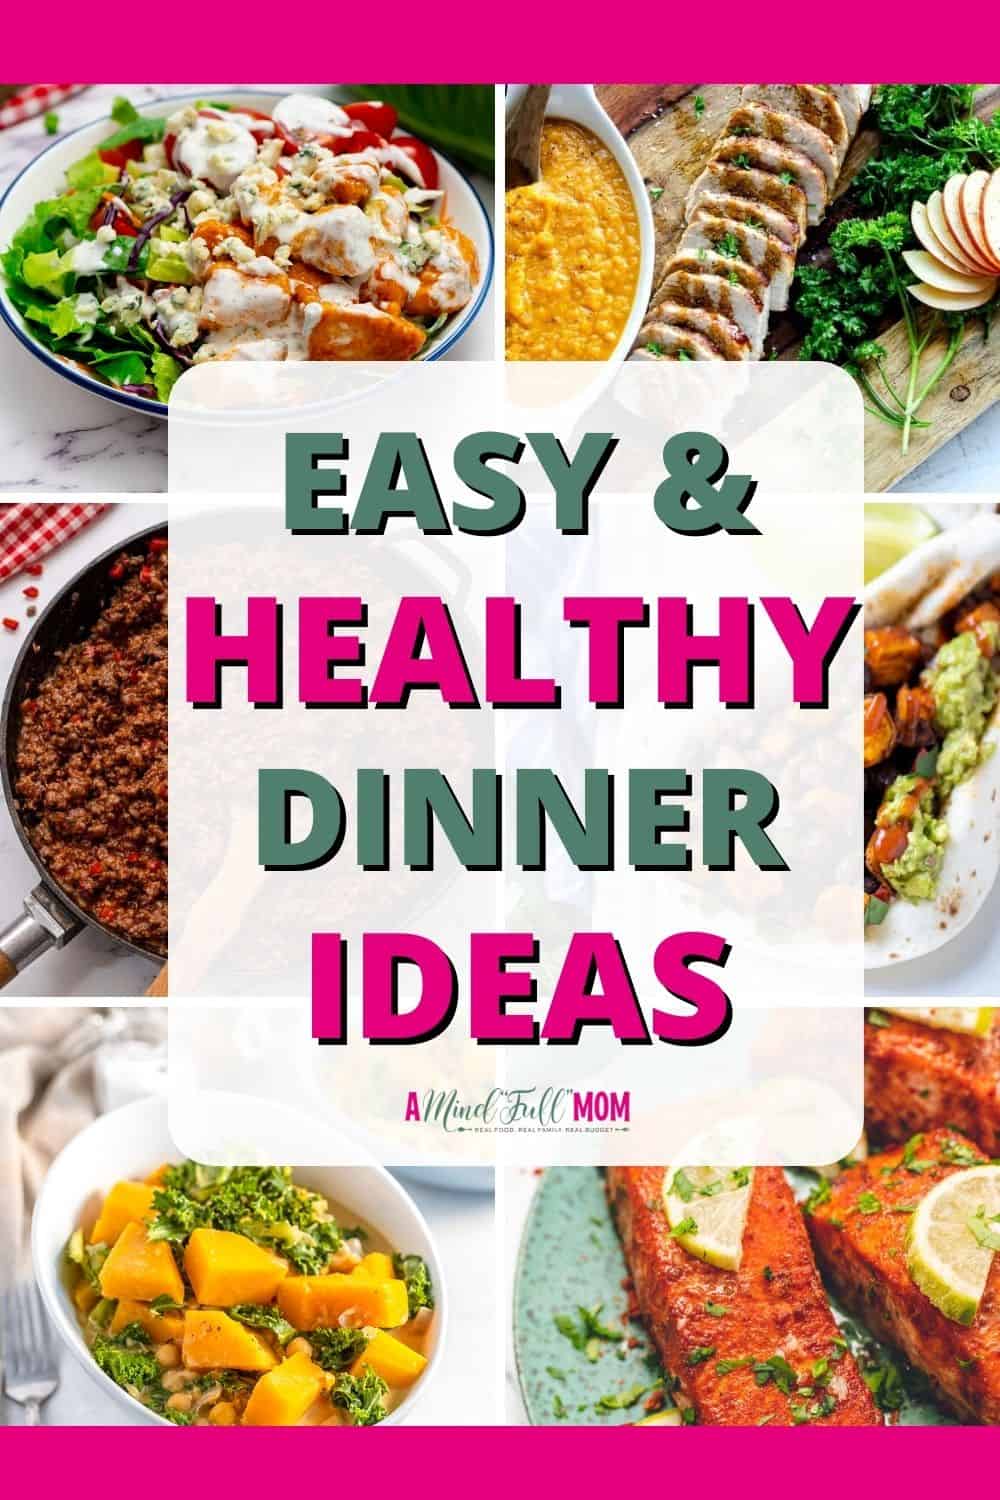 You are going to want to bookmark these Easy Healthy Dinner Ideas. This collection features quick and easy meals that all come together in under 30 minutes, making them the perfect recipes to turn to when you are short on time but still want to deliver a healthy dinner to your family.